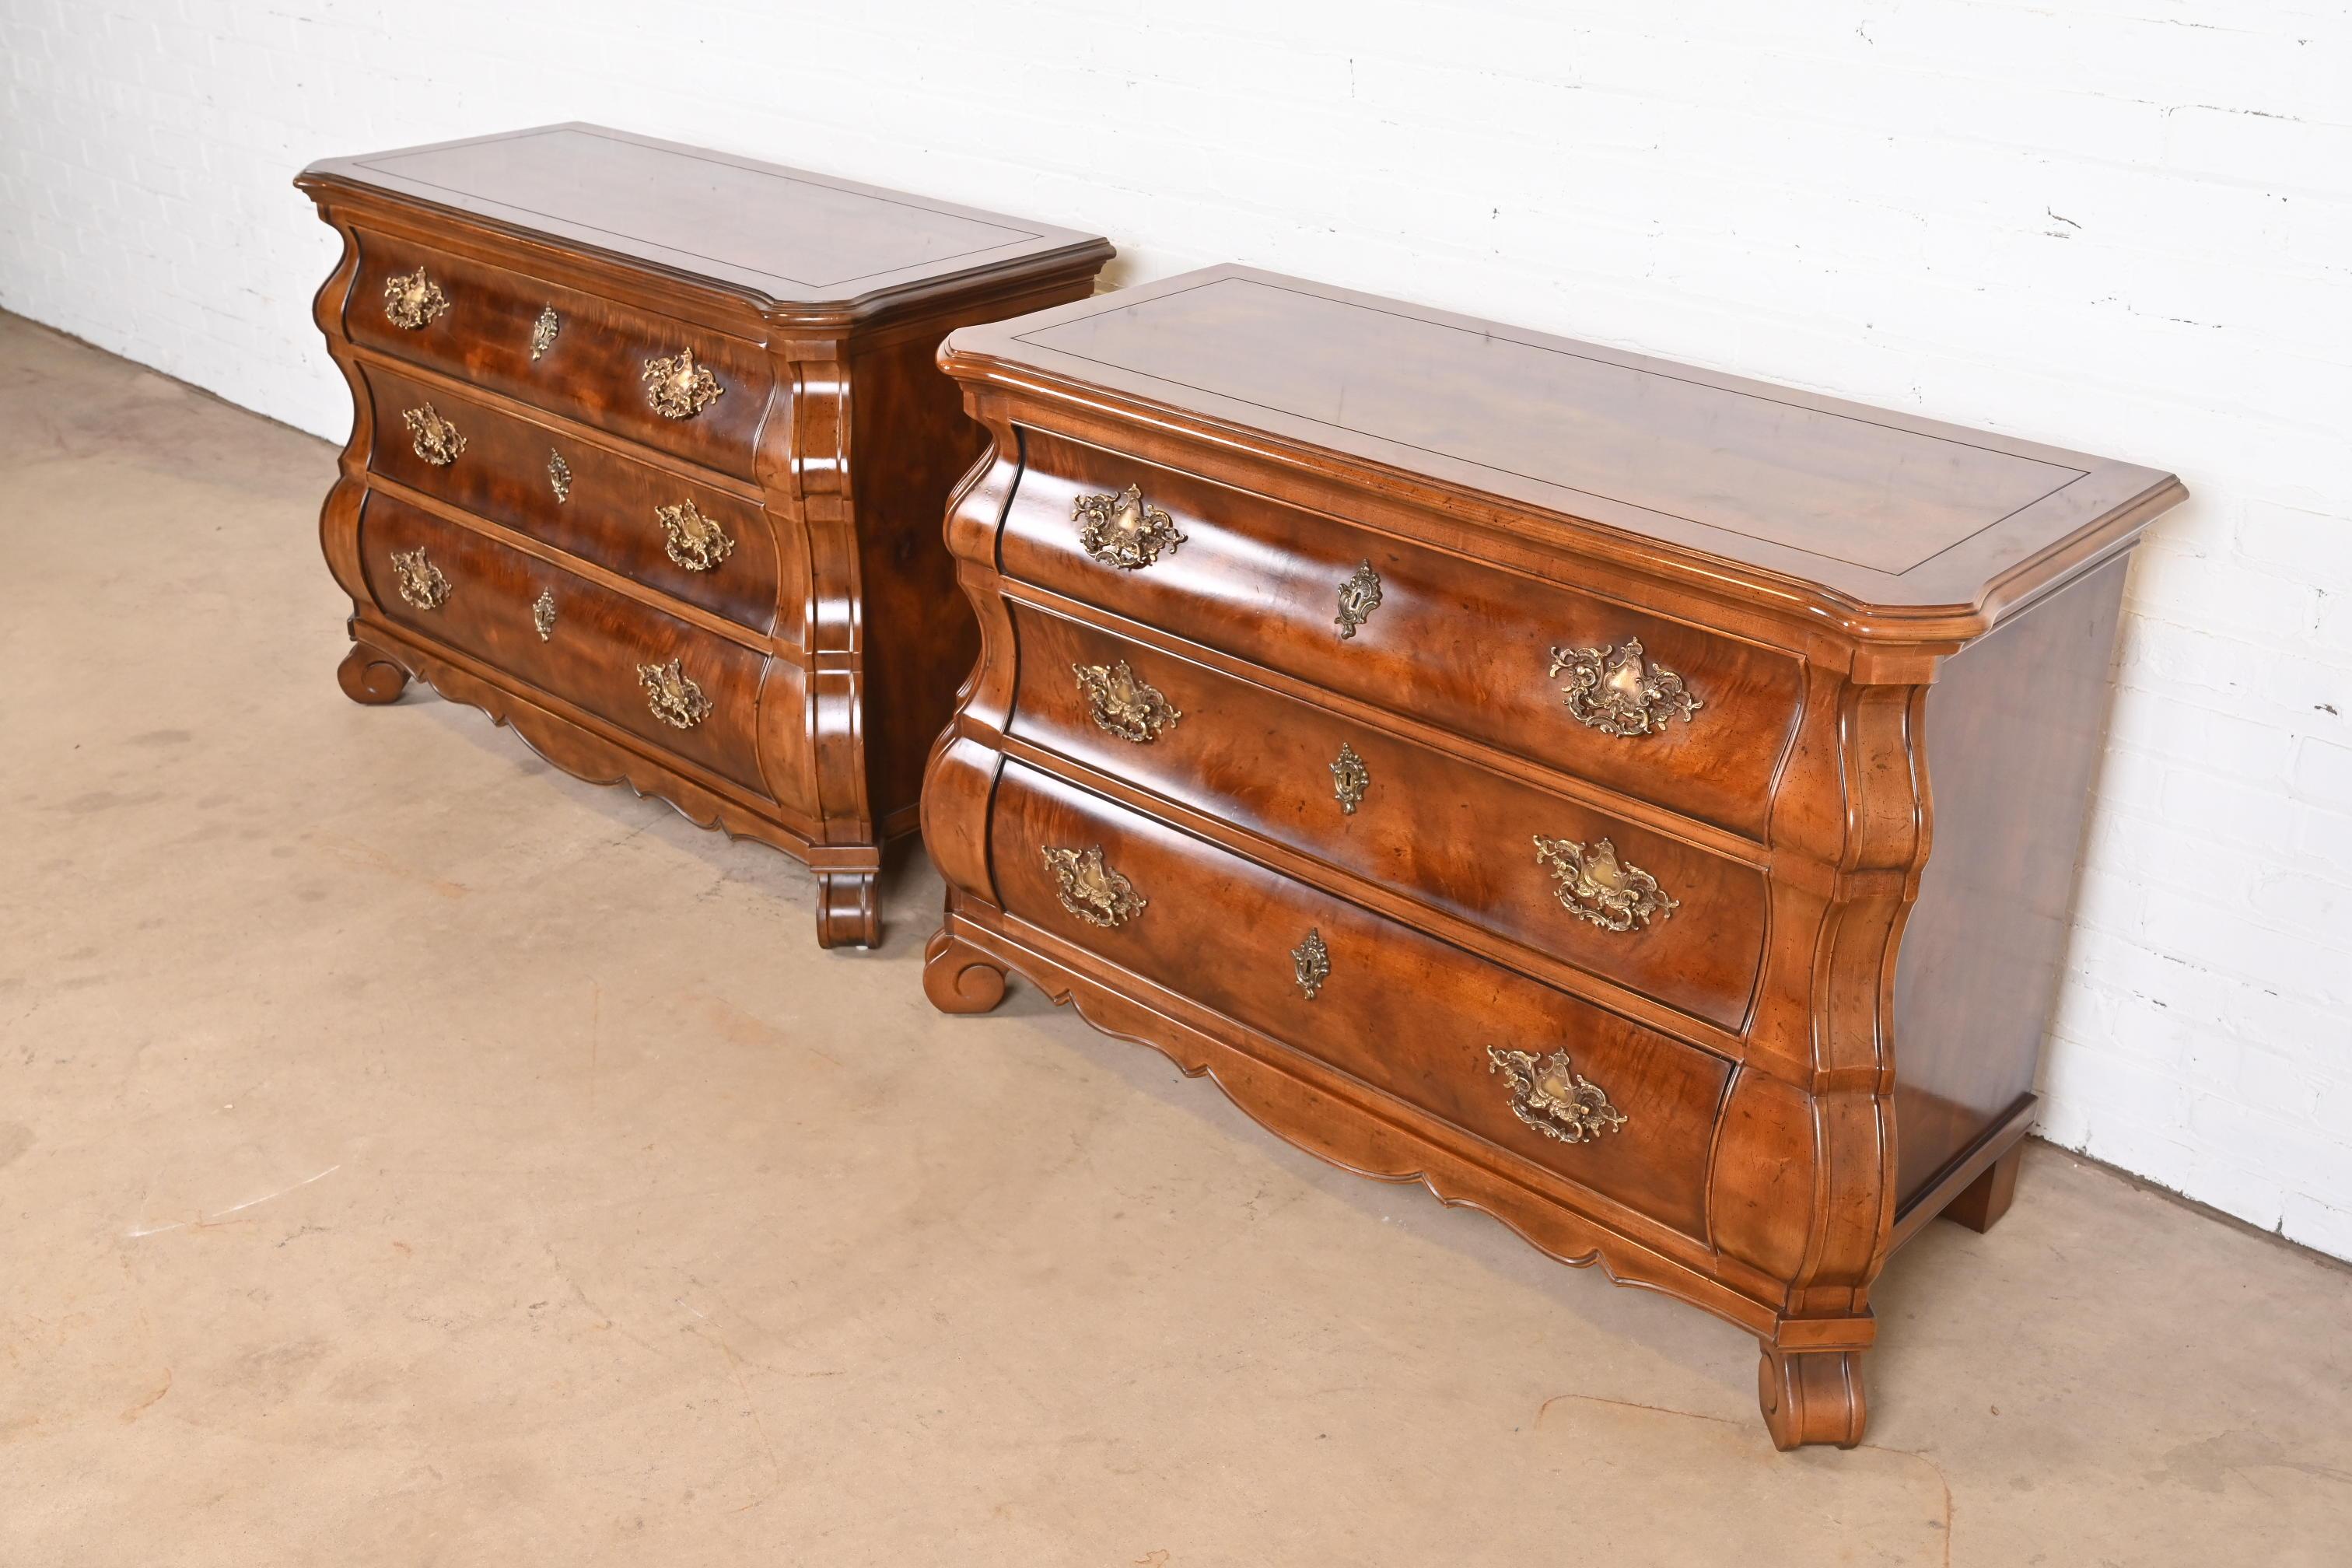 Late 20th Century Henredon Italian Baroque Burled Mahogany Bombay Chests or Commodes, Pair For Sale